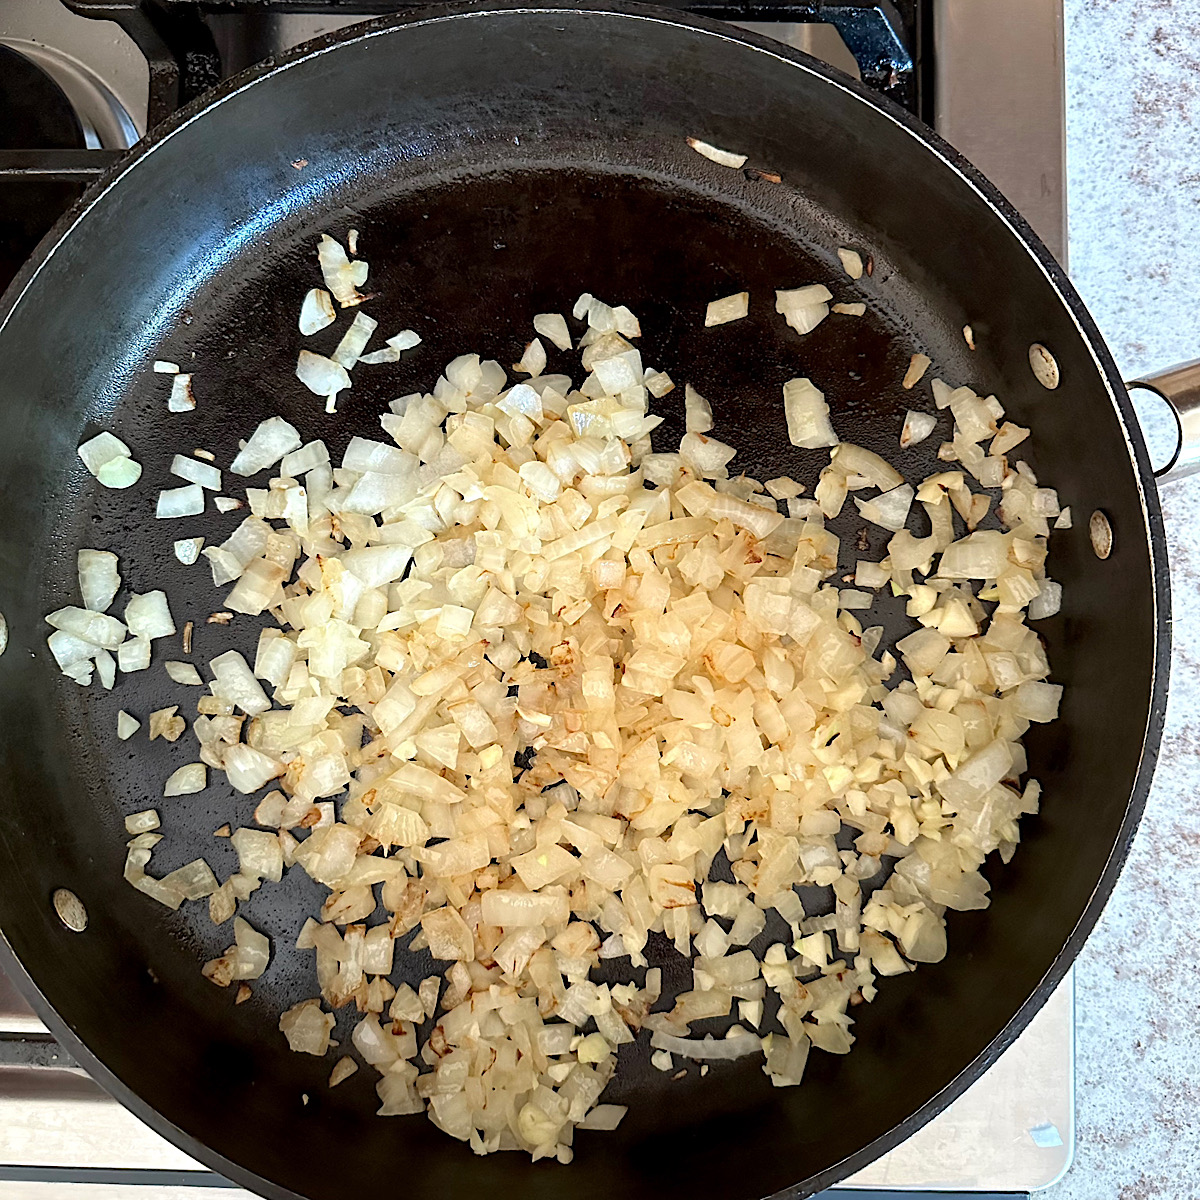 Chopped onions carmelizing in skillet